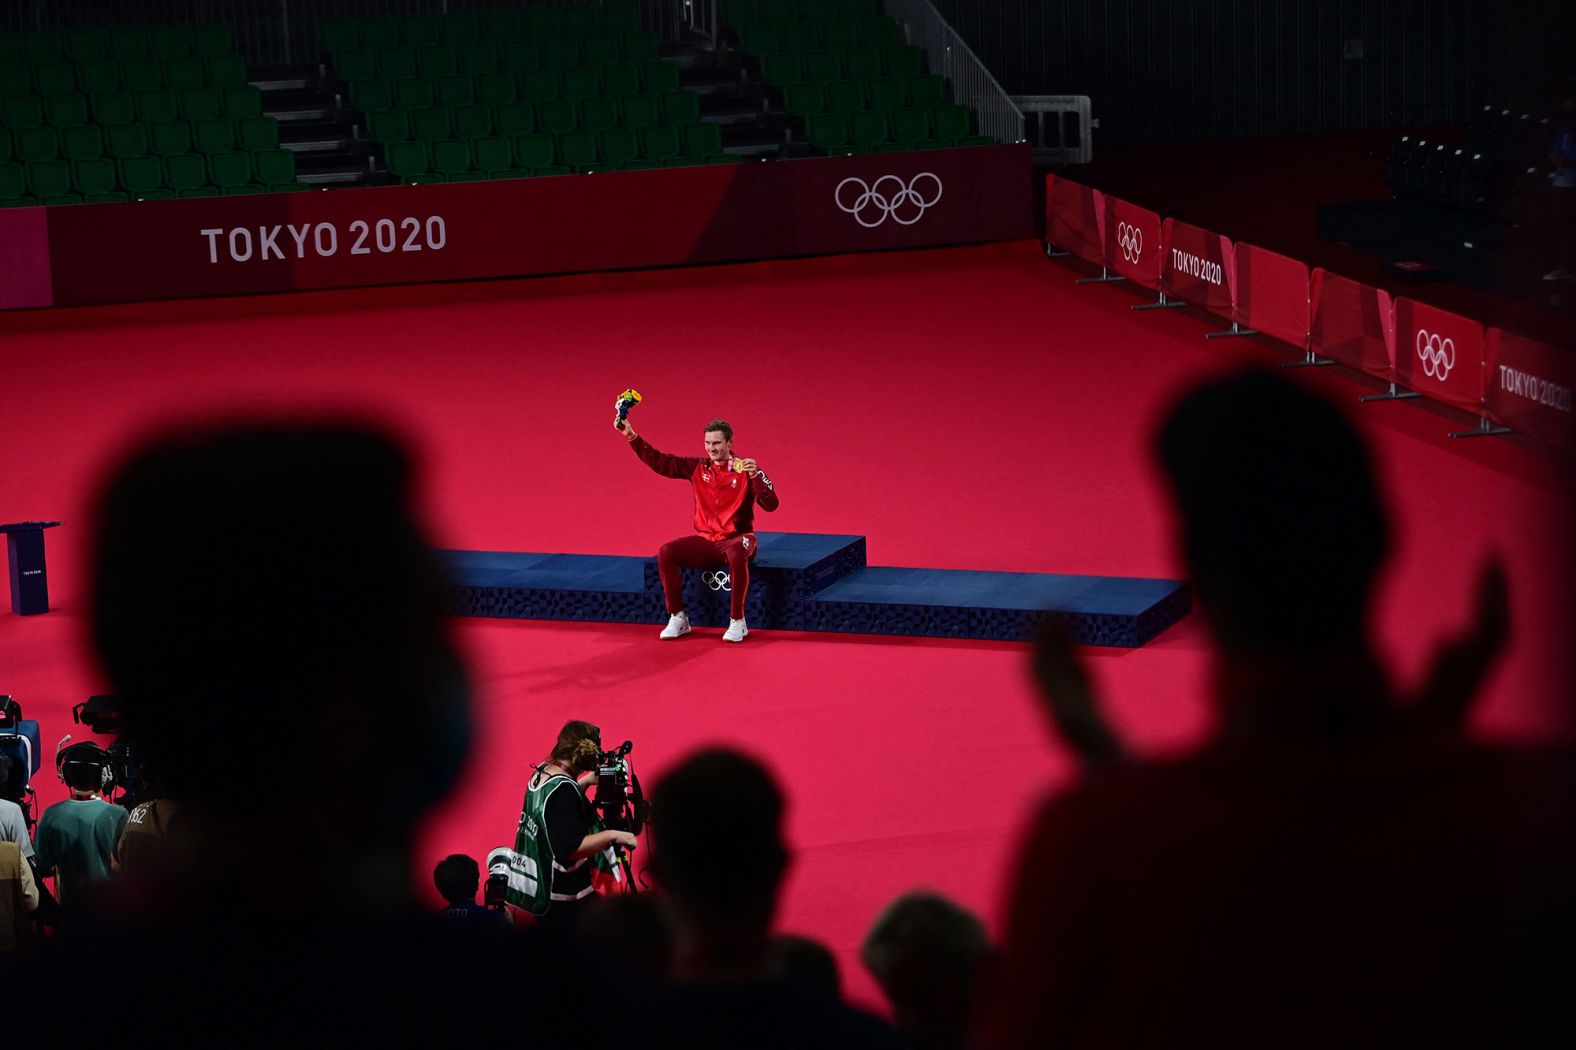 Denmark's Viktor Axelsen is applauded after receiving his <a href="index.php?page=&url=https%3A%2F%2Fwww.cnn.com%2Fworld%2Flive-news%2Ftokyo-2020-olympics-08-02-21-spt%2Fh_9eeee5368bdc8f9a5ecb35b3a3a125fc" target="_blank">badminton gold medal</a> on Monday, August 2. He is the first player from outside of Asia to win Olympic gold in men's singles in more than 20 years.